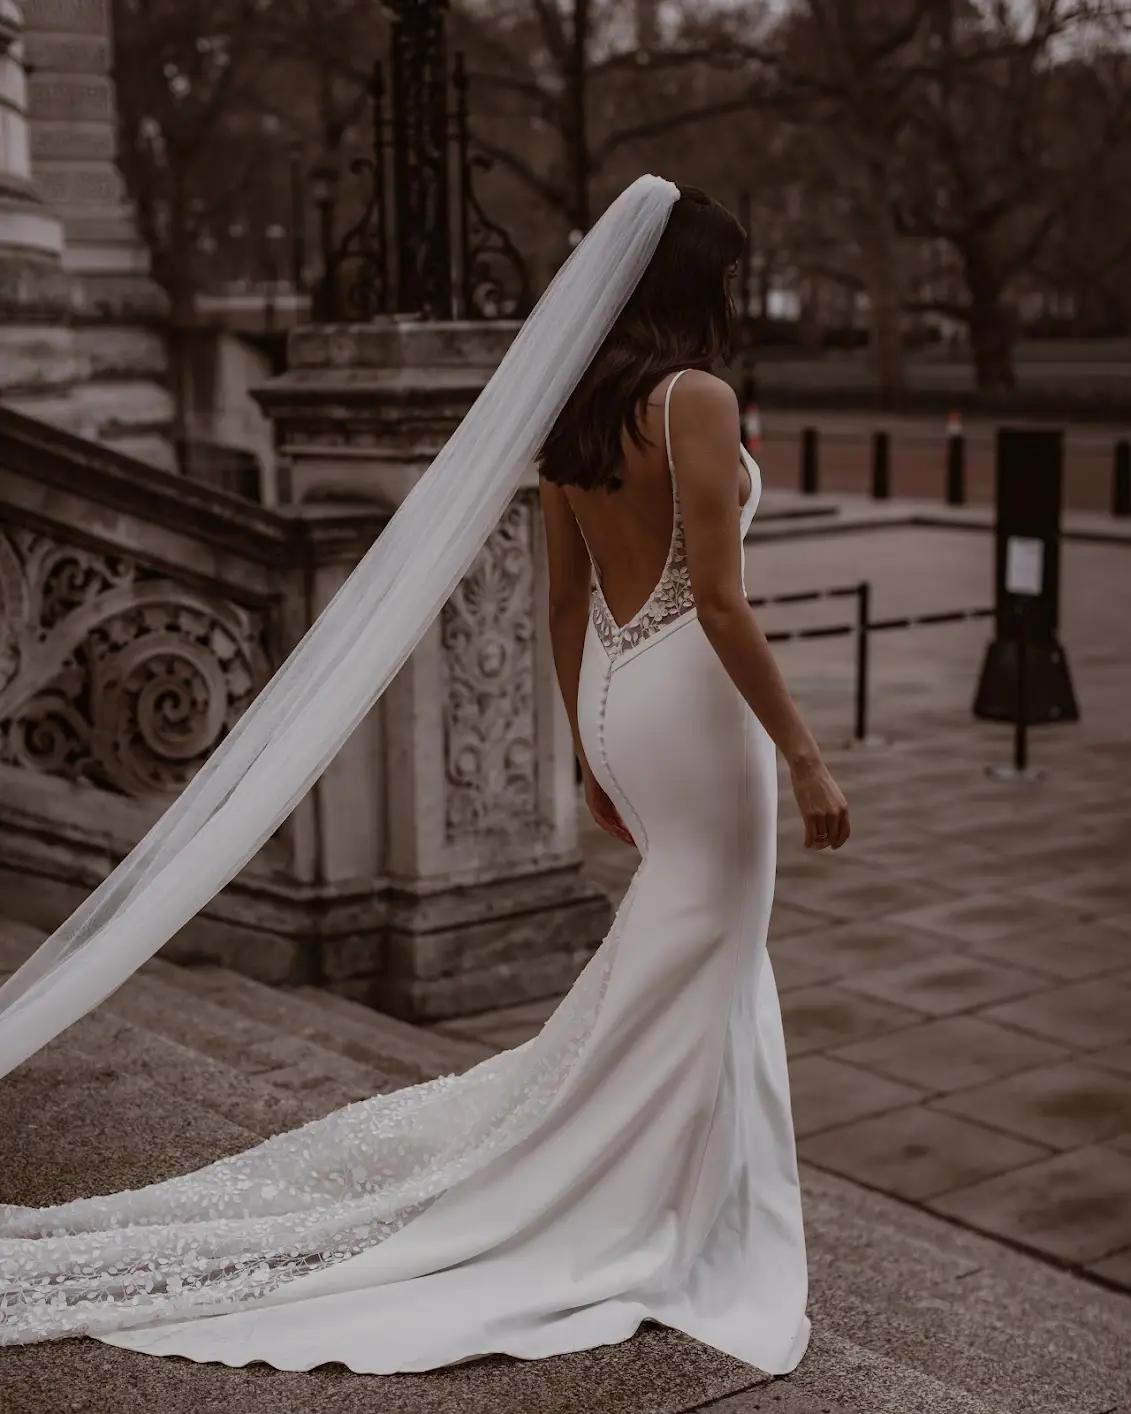 Model wearing style 'Valley' wedding dress from Made With Love